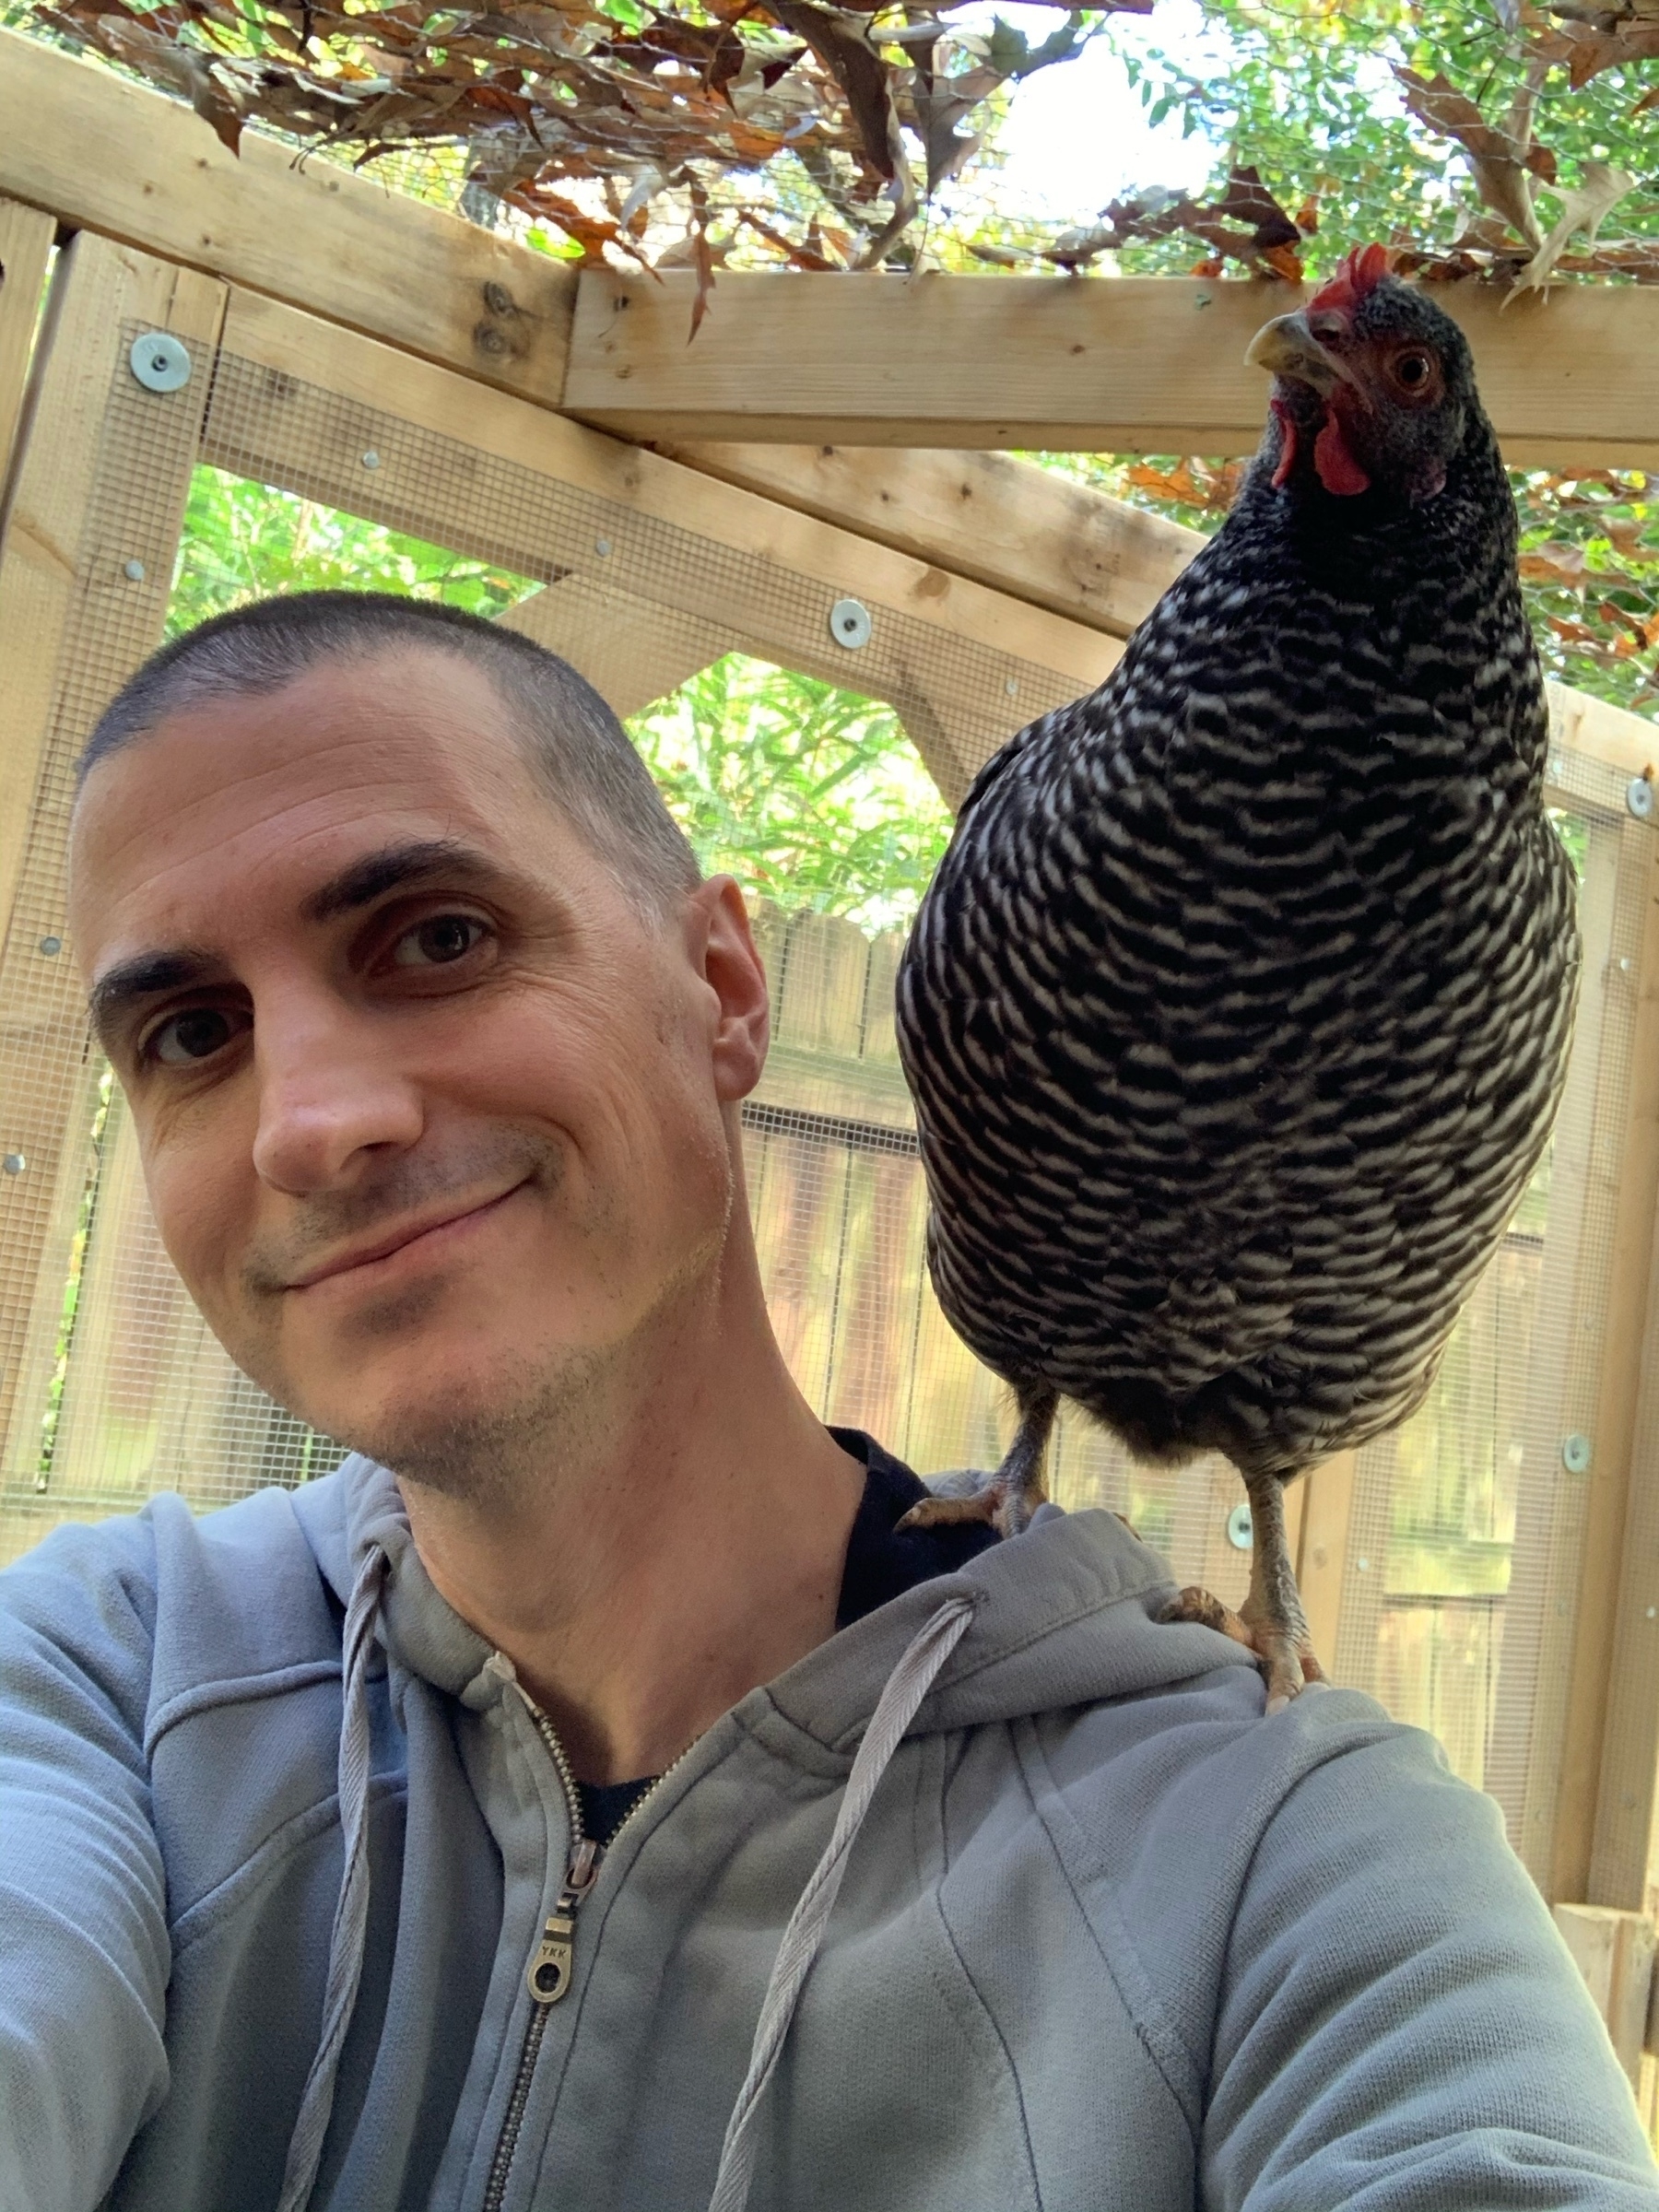 Latte the hen, as always, perched on my shoulder!